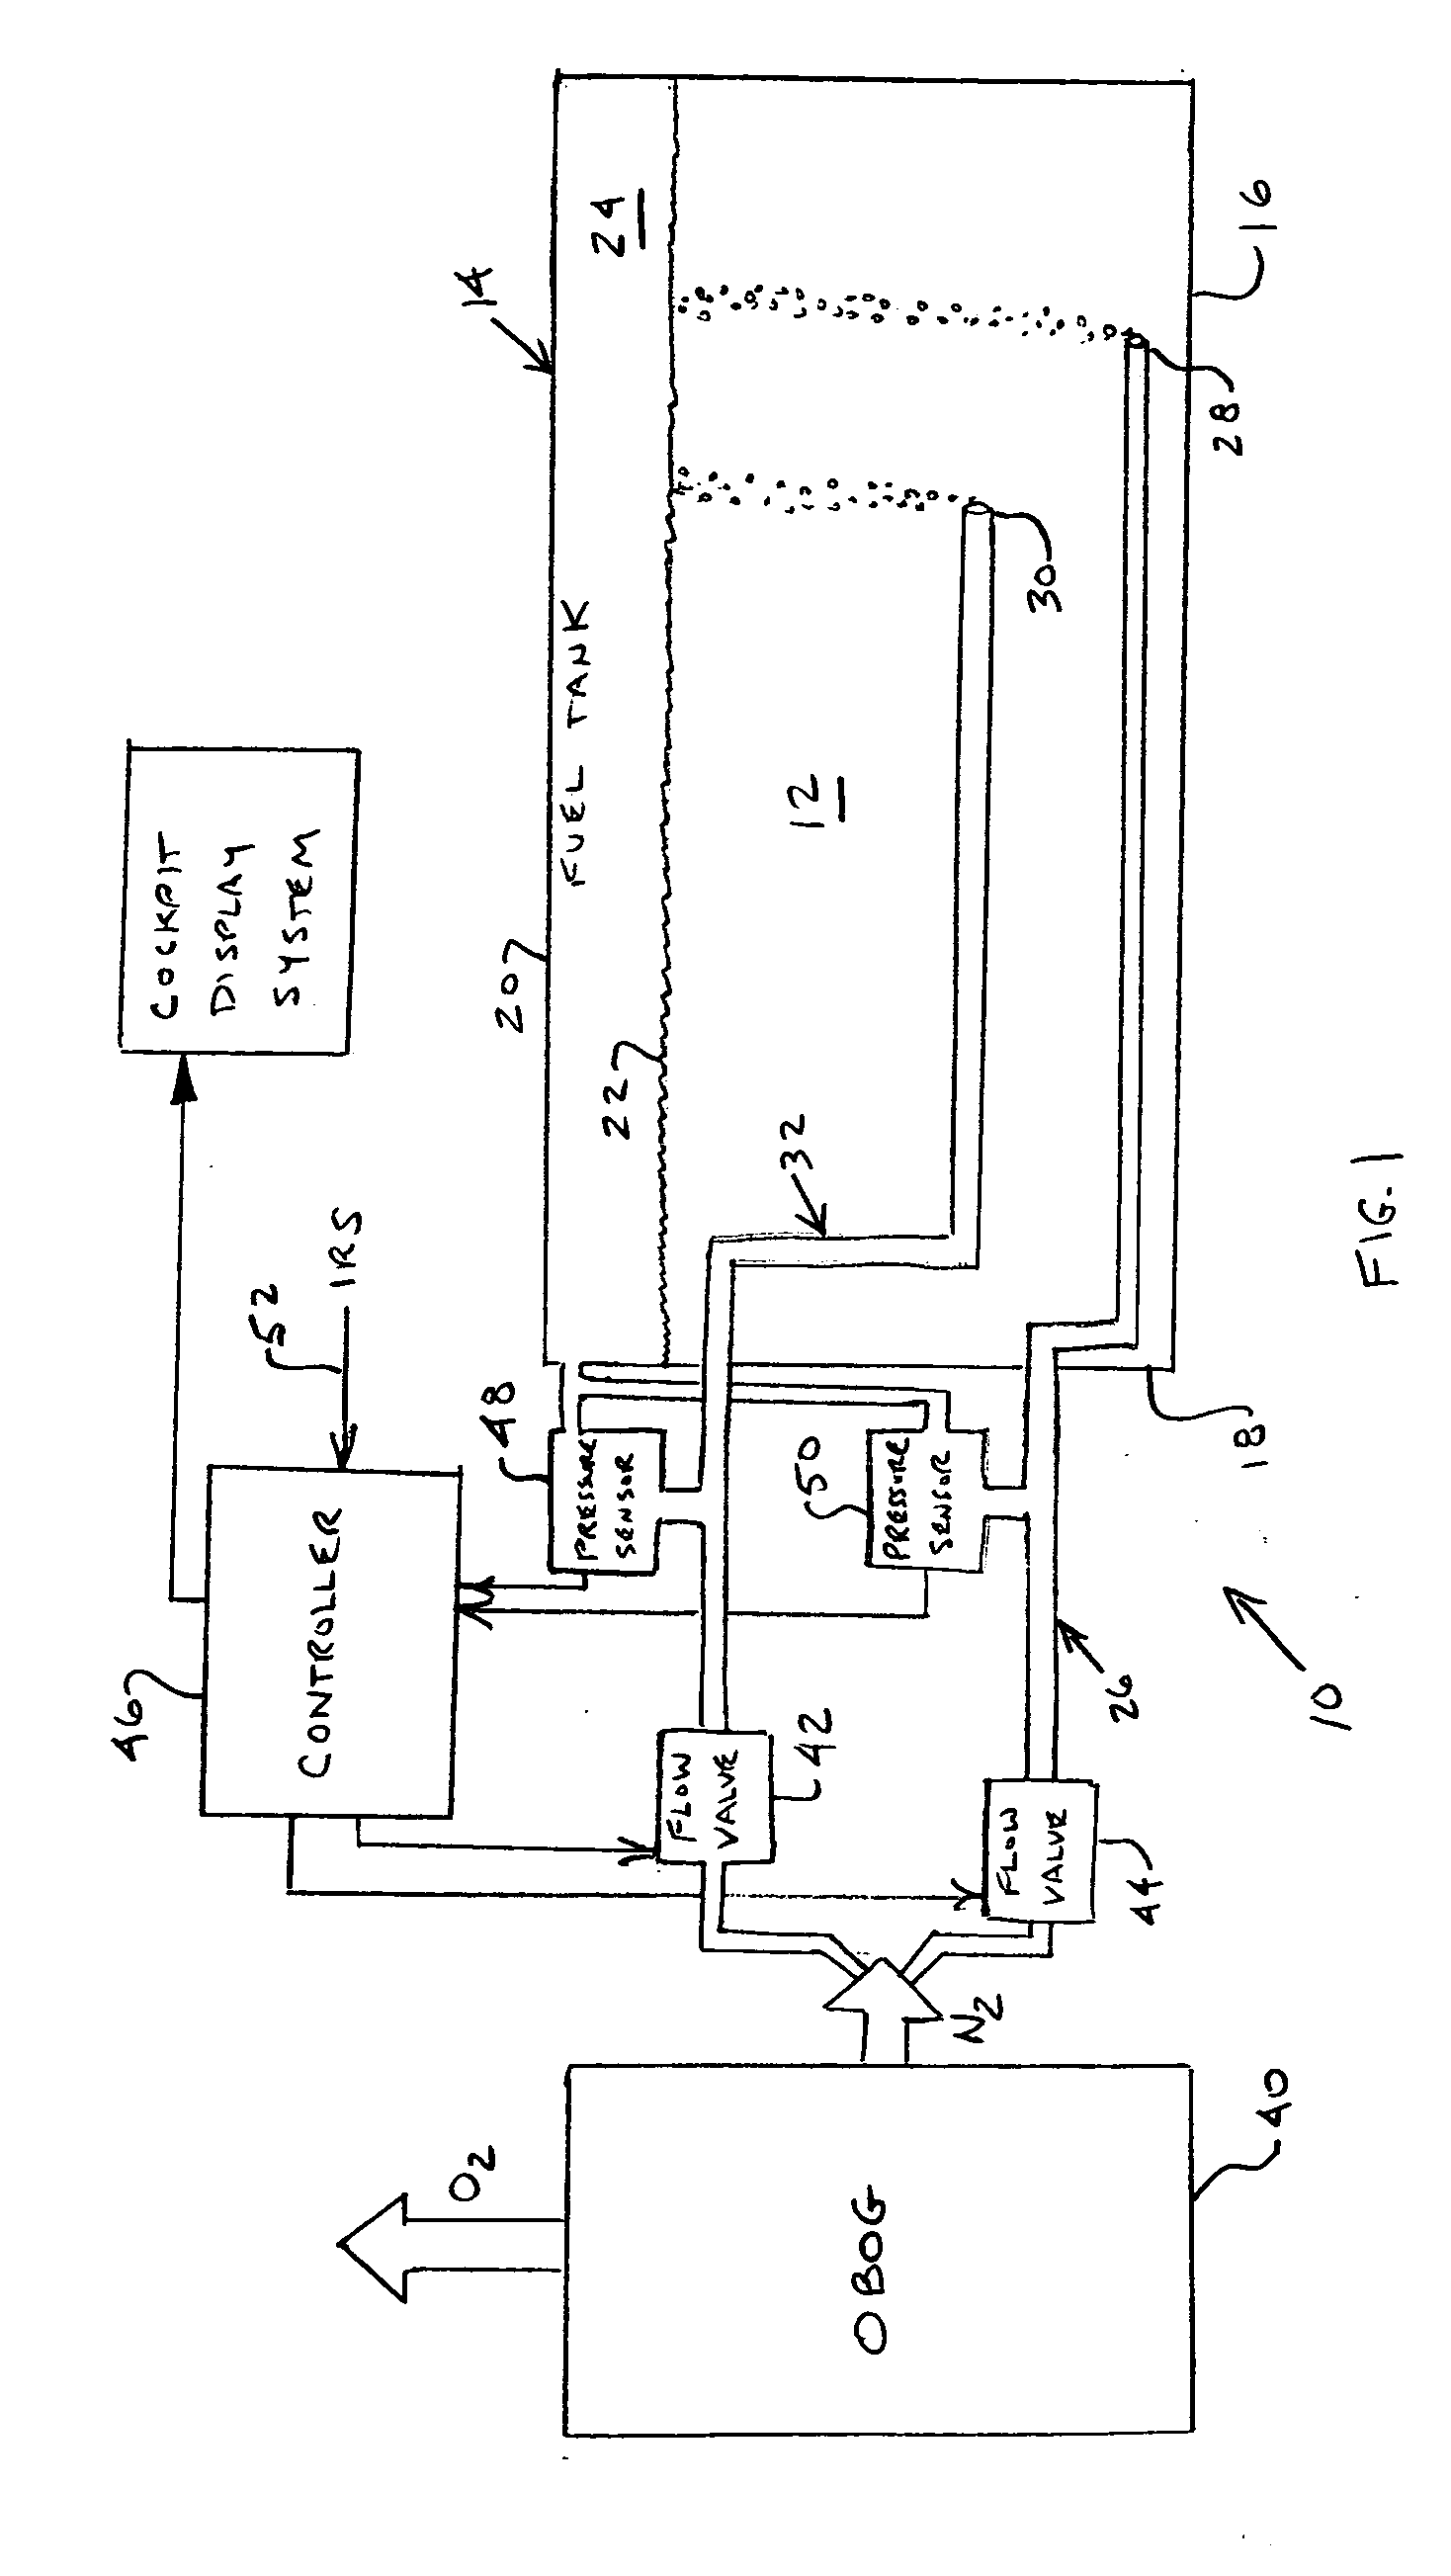 Pressure-based aircraft fuel capacity monitoring system and method